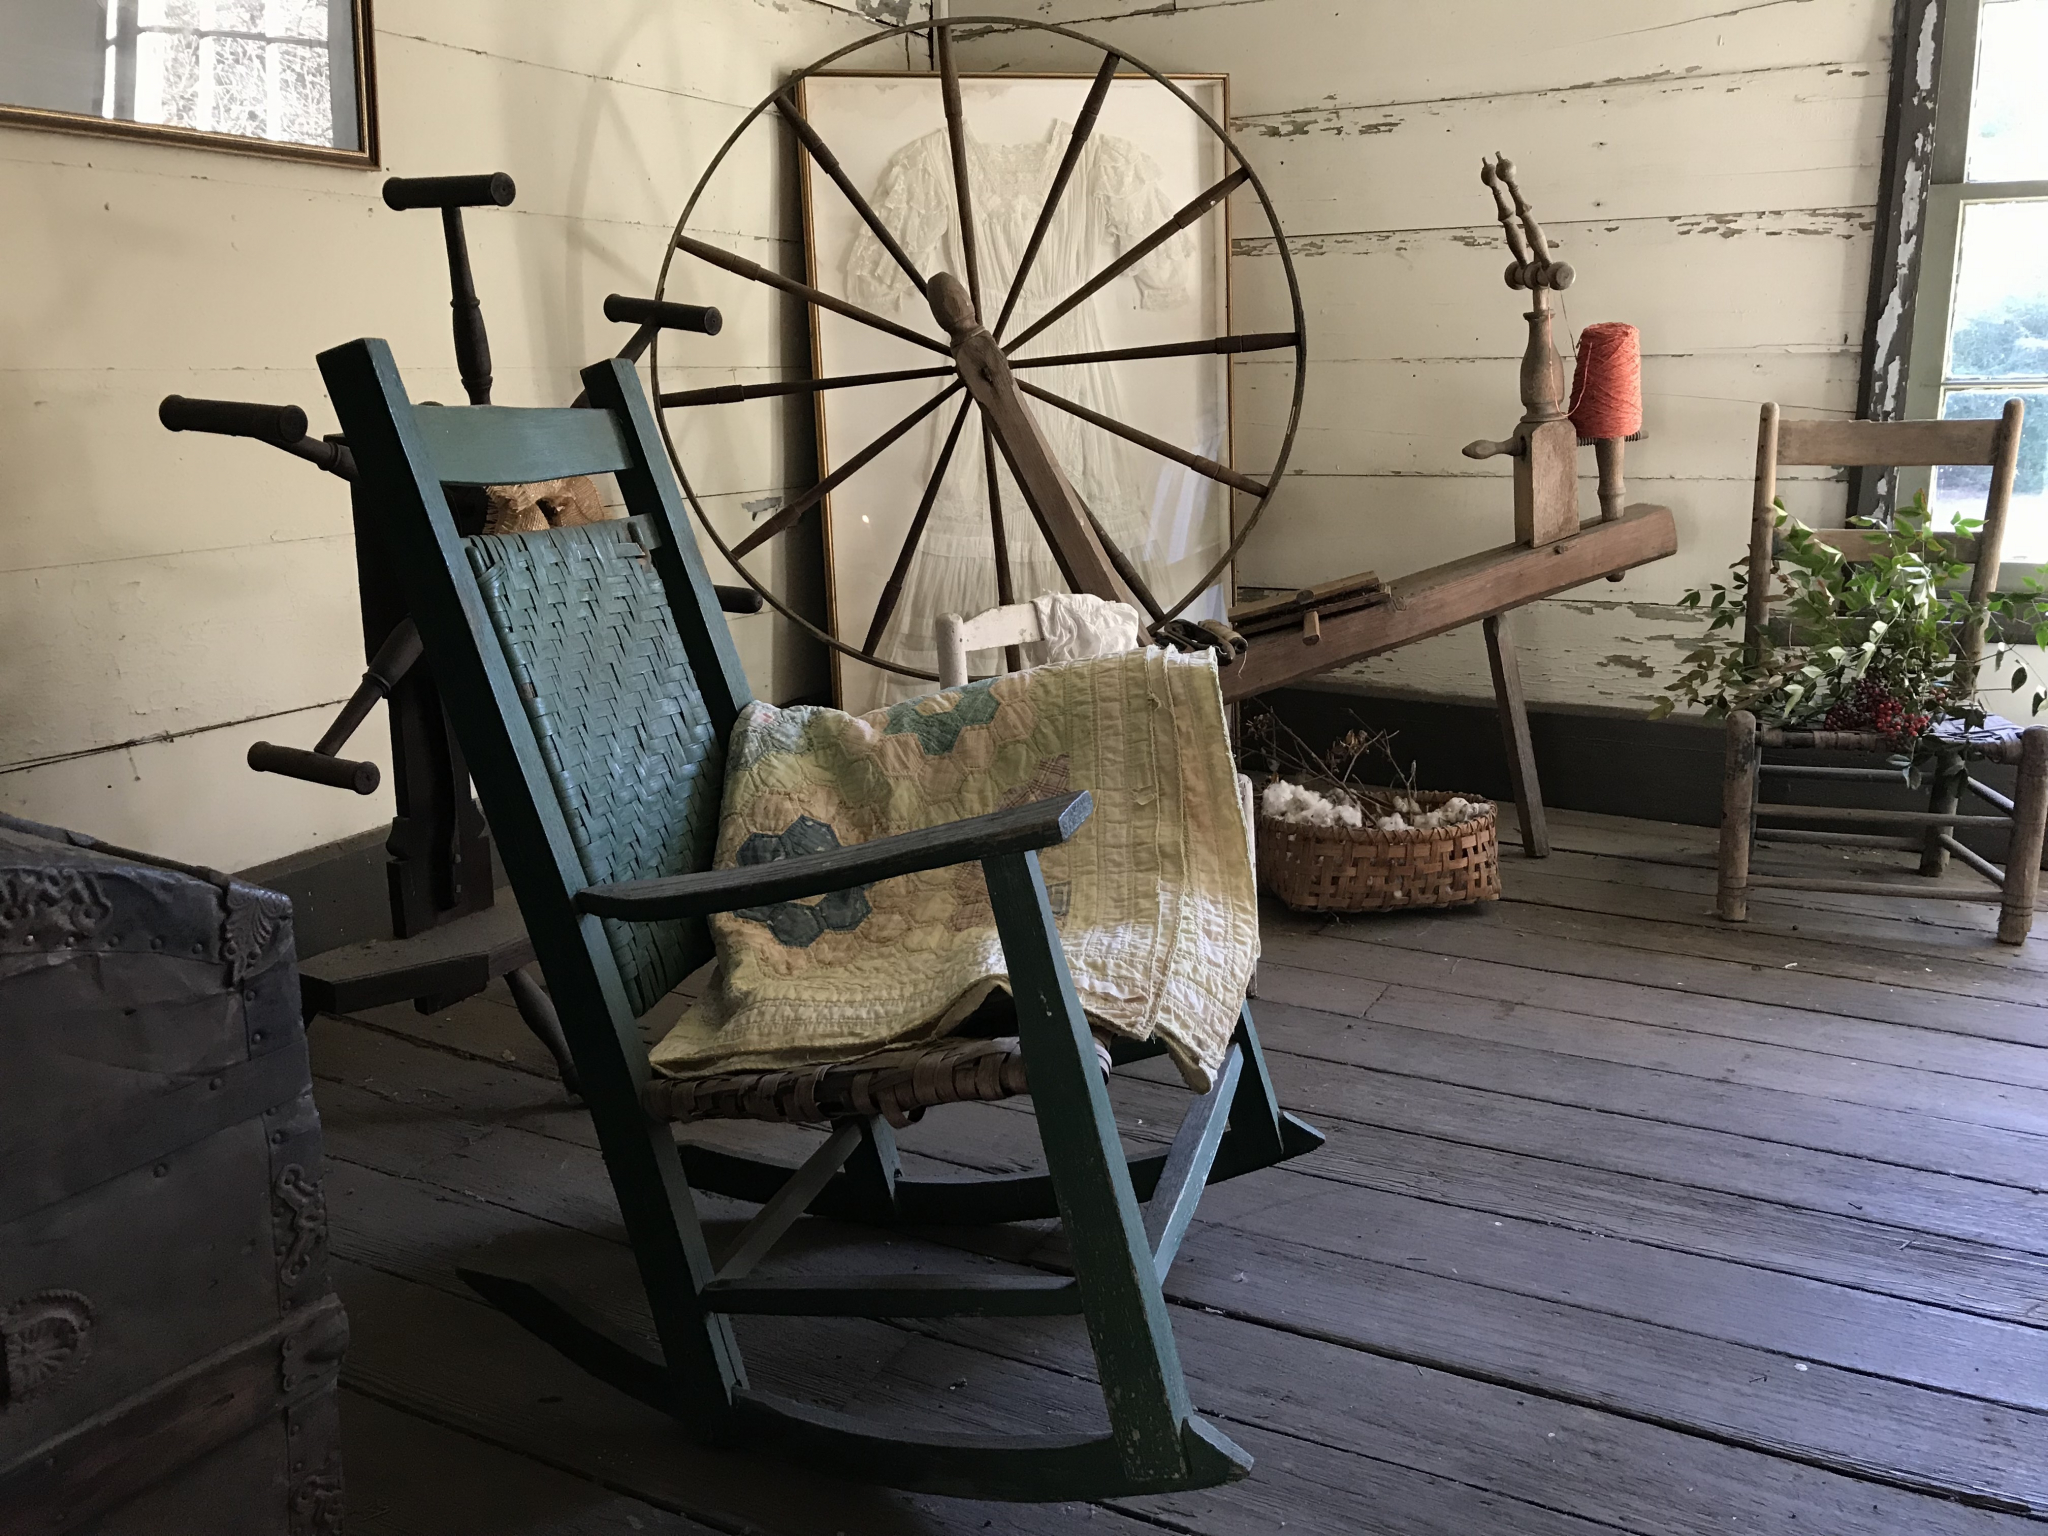 Bessemer, McCalla, Alabama, Eastern Valley Road, West Jefferson County Historical Society, Christmas Heritage Tour, Pioneer Homes, McAdory House, rocking chair, spinning wheel